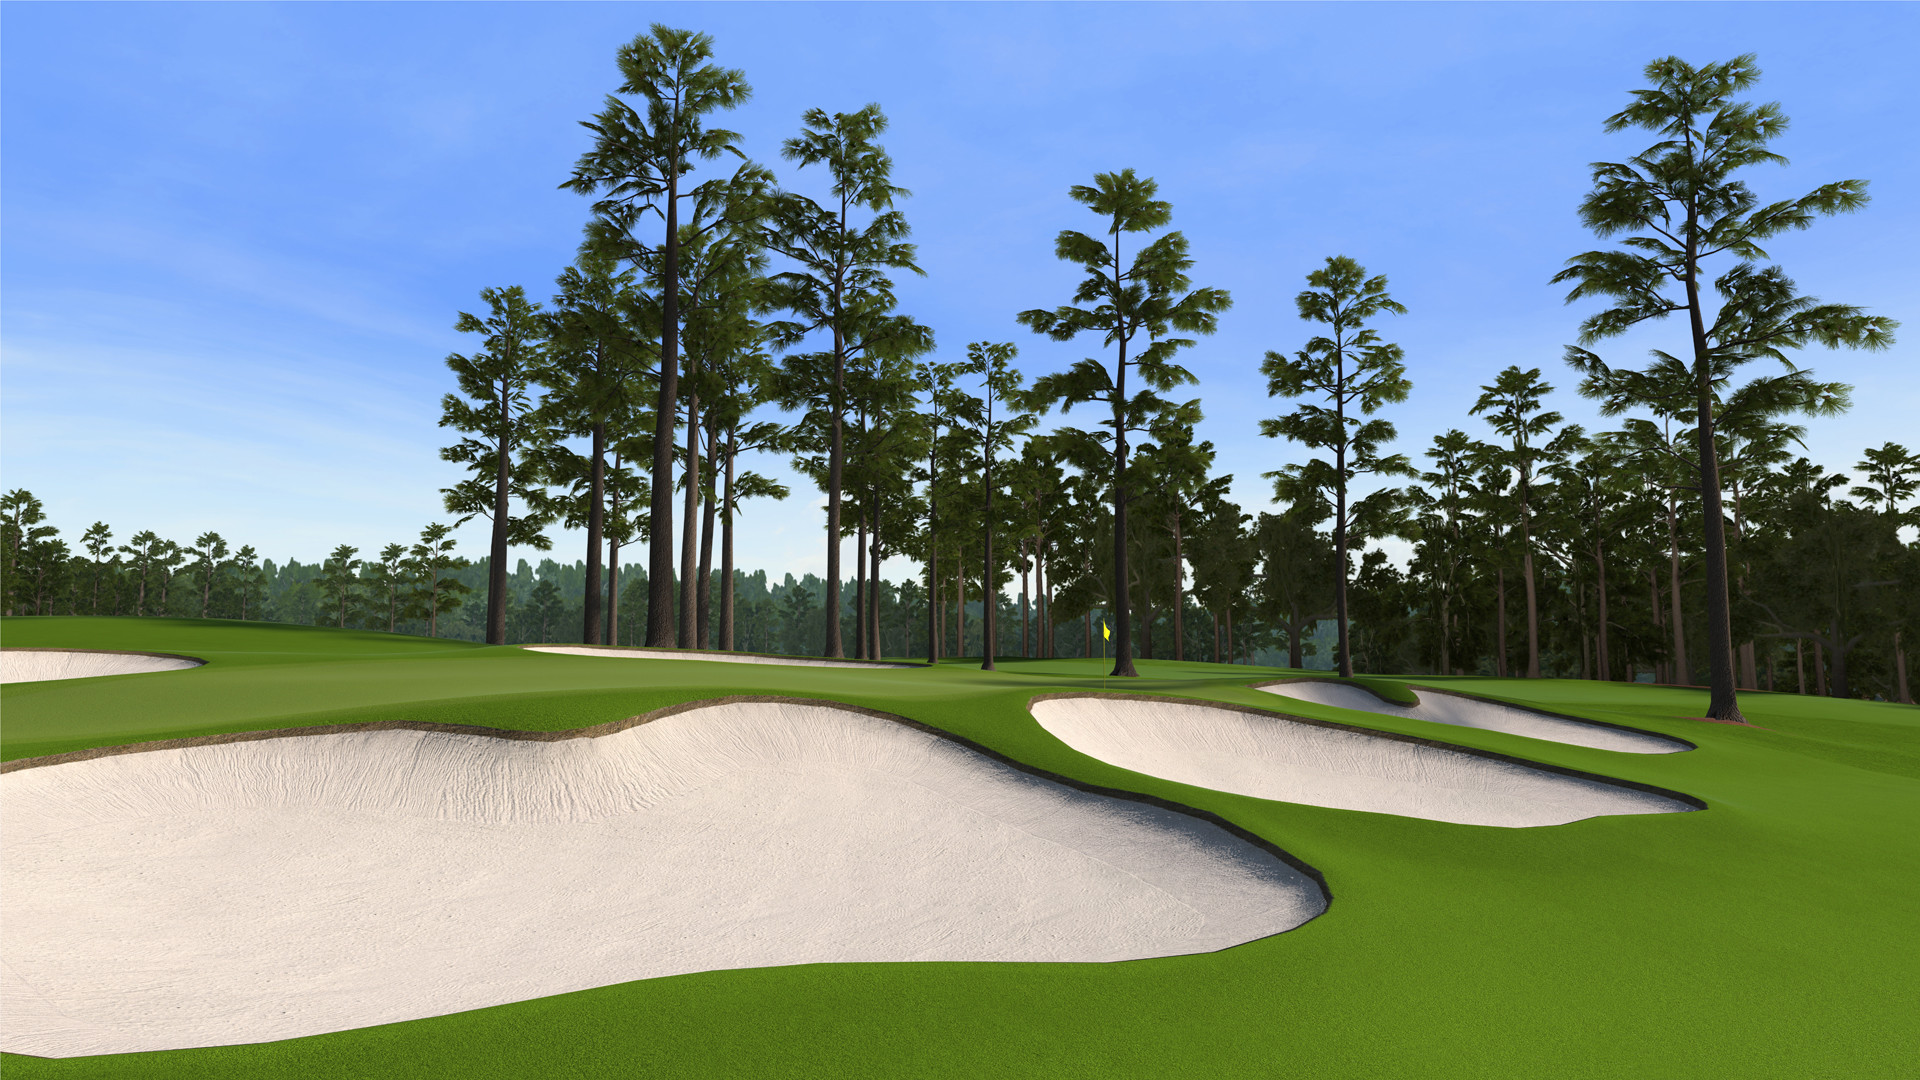 7 At Augusta National As Seen In The Ps3 And Xbox 360 - Tiger Woods 2012 -  1920x1080 Wallpaper 